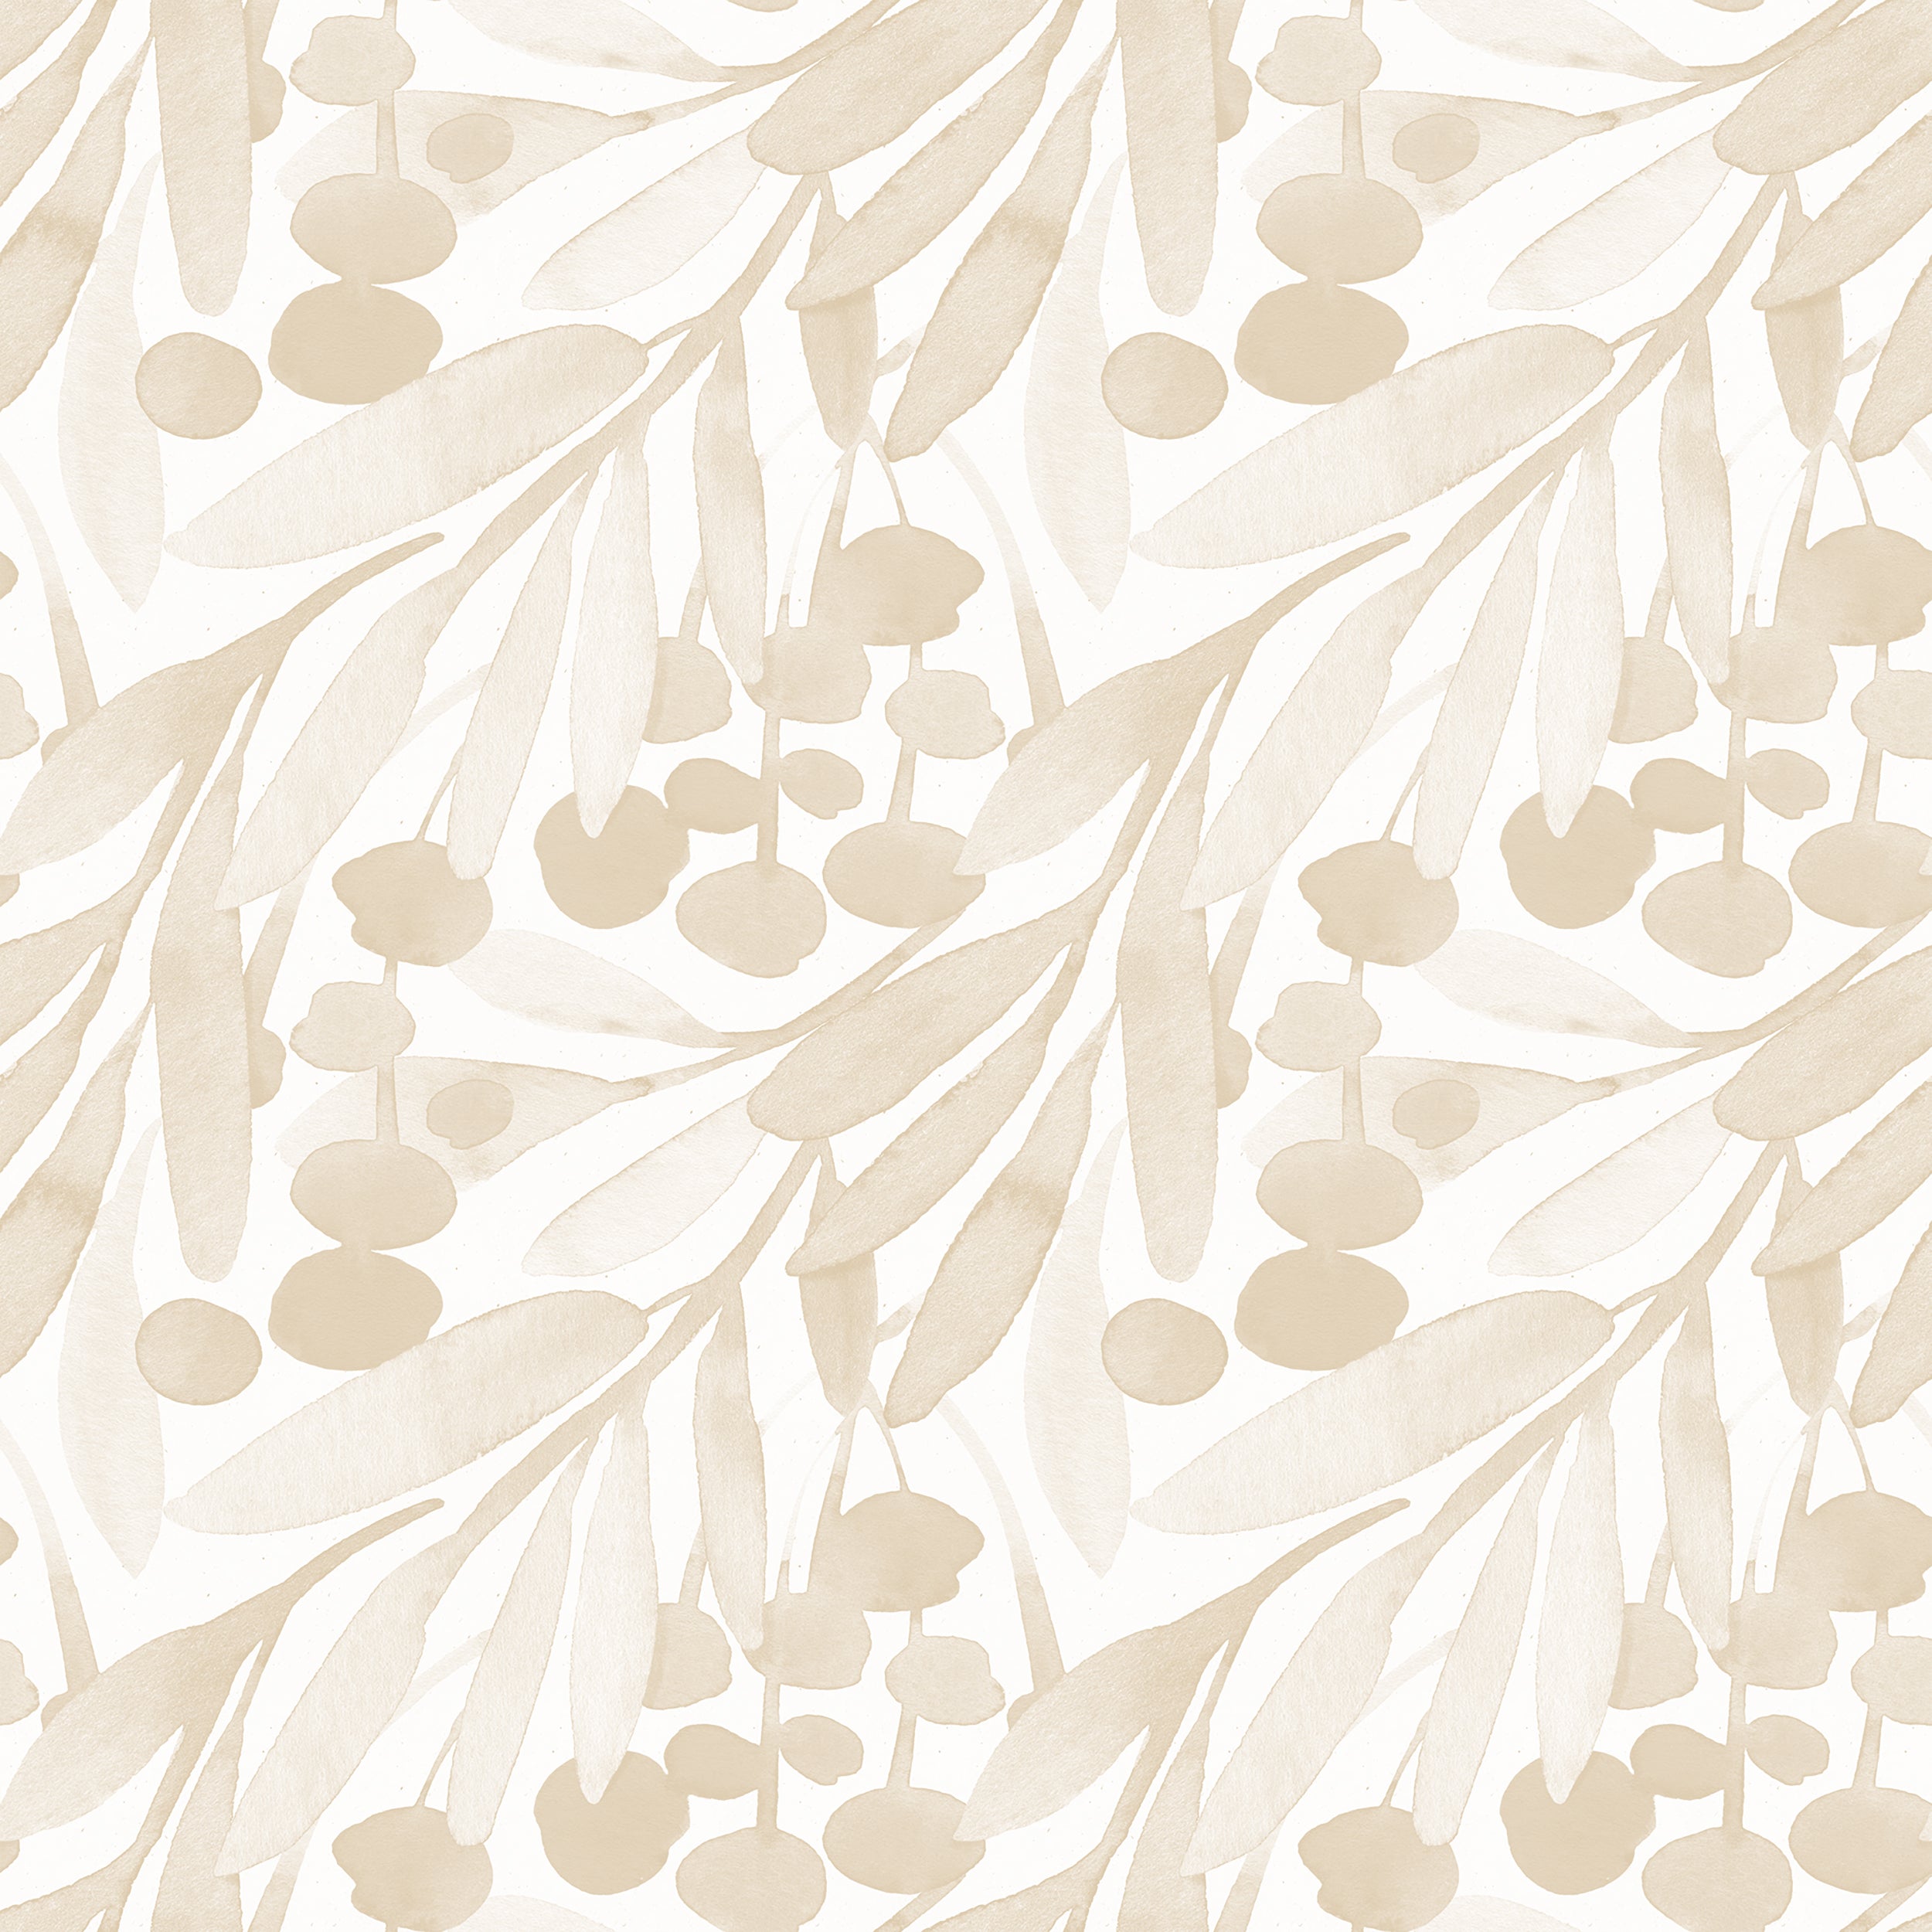 A subtle watercolour design of botanical leaves and berries in soft beige tones, the Watercolour Botanical Wallpaper brings a tranquil, naturalistic feel to any room, ideal for creating a relaxing and aesthetically pleasing environment.